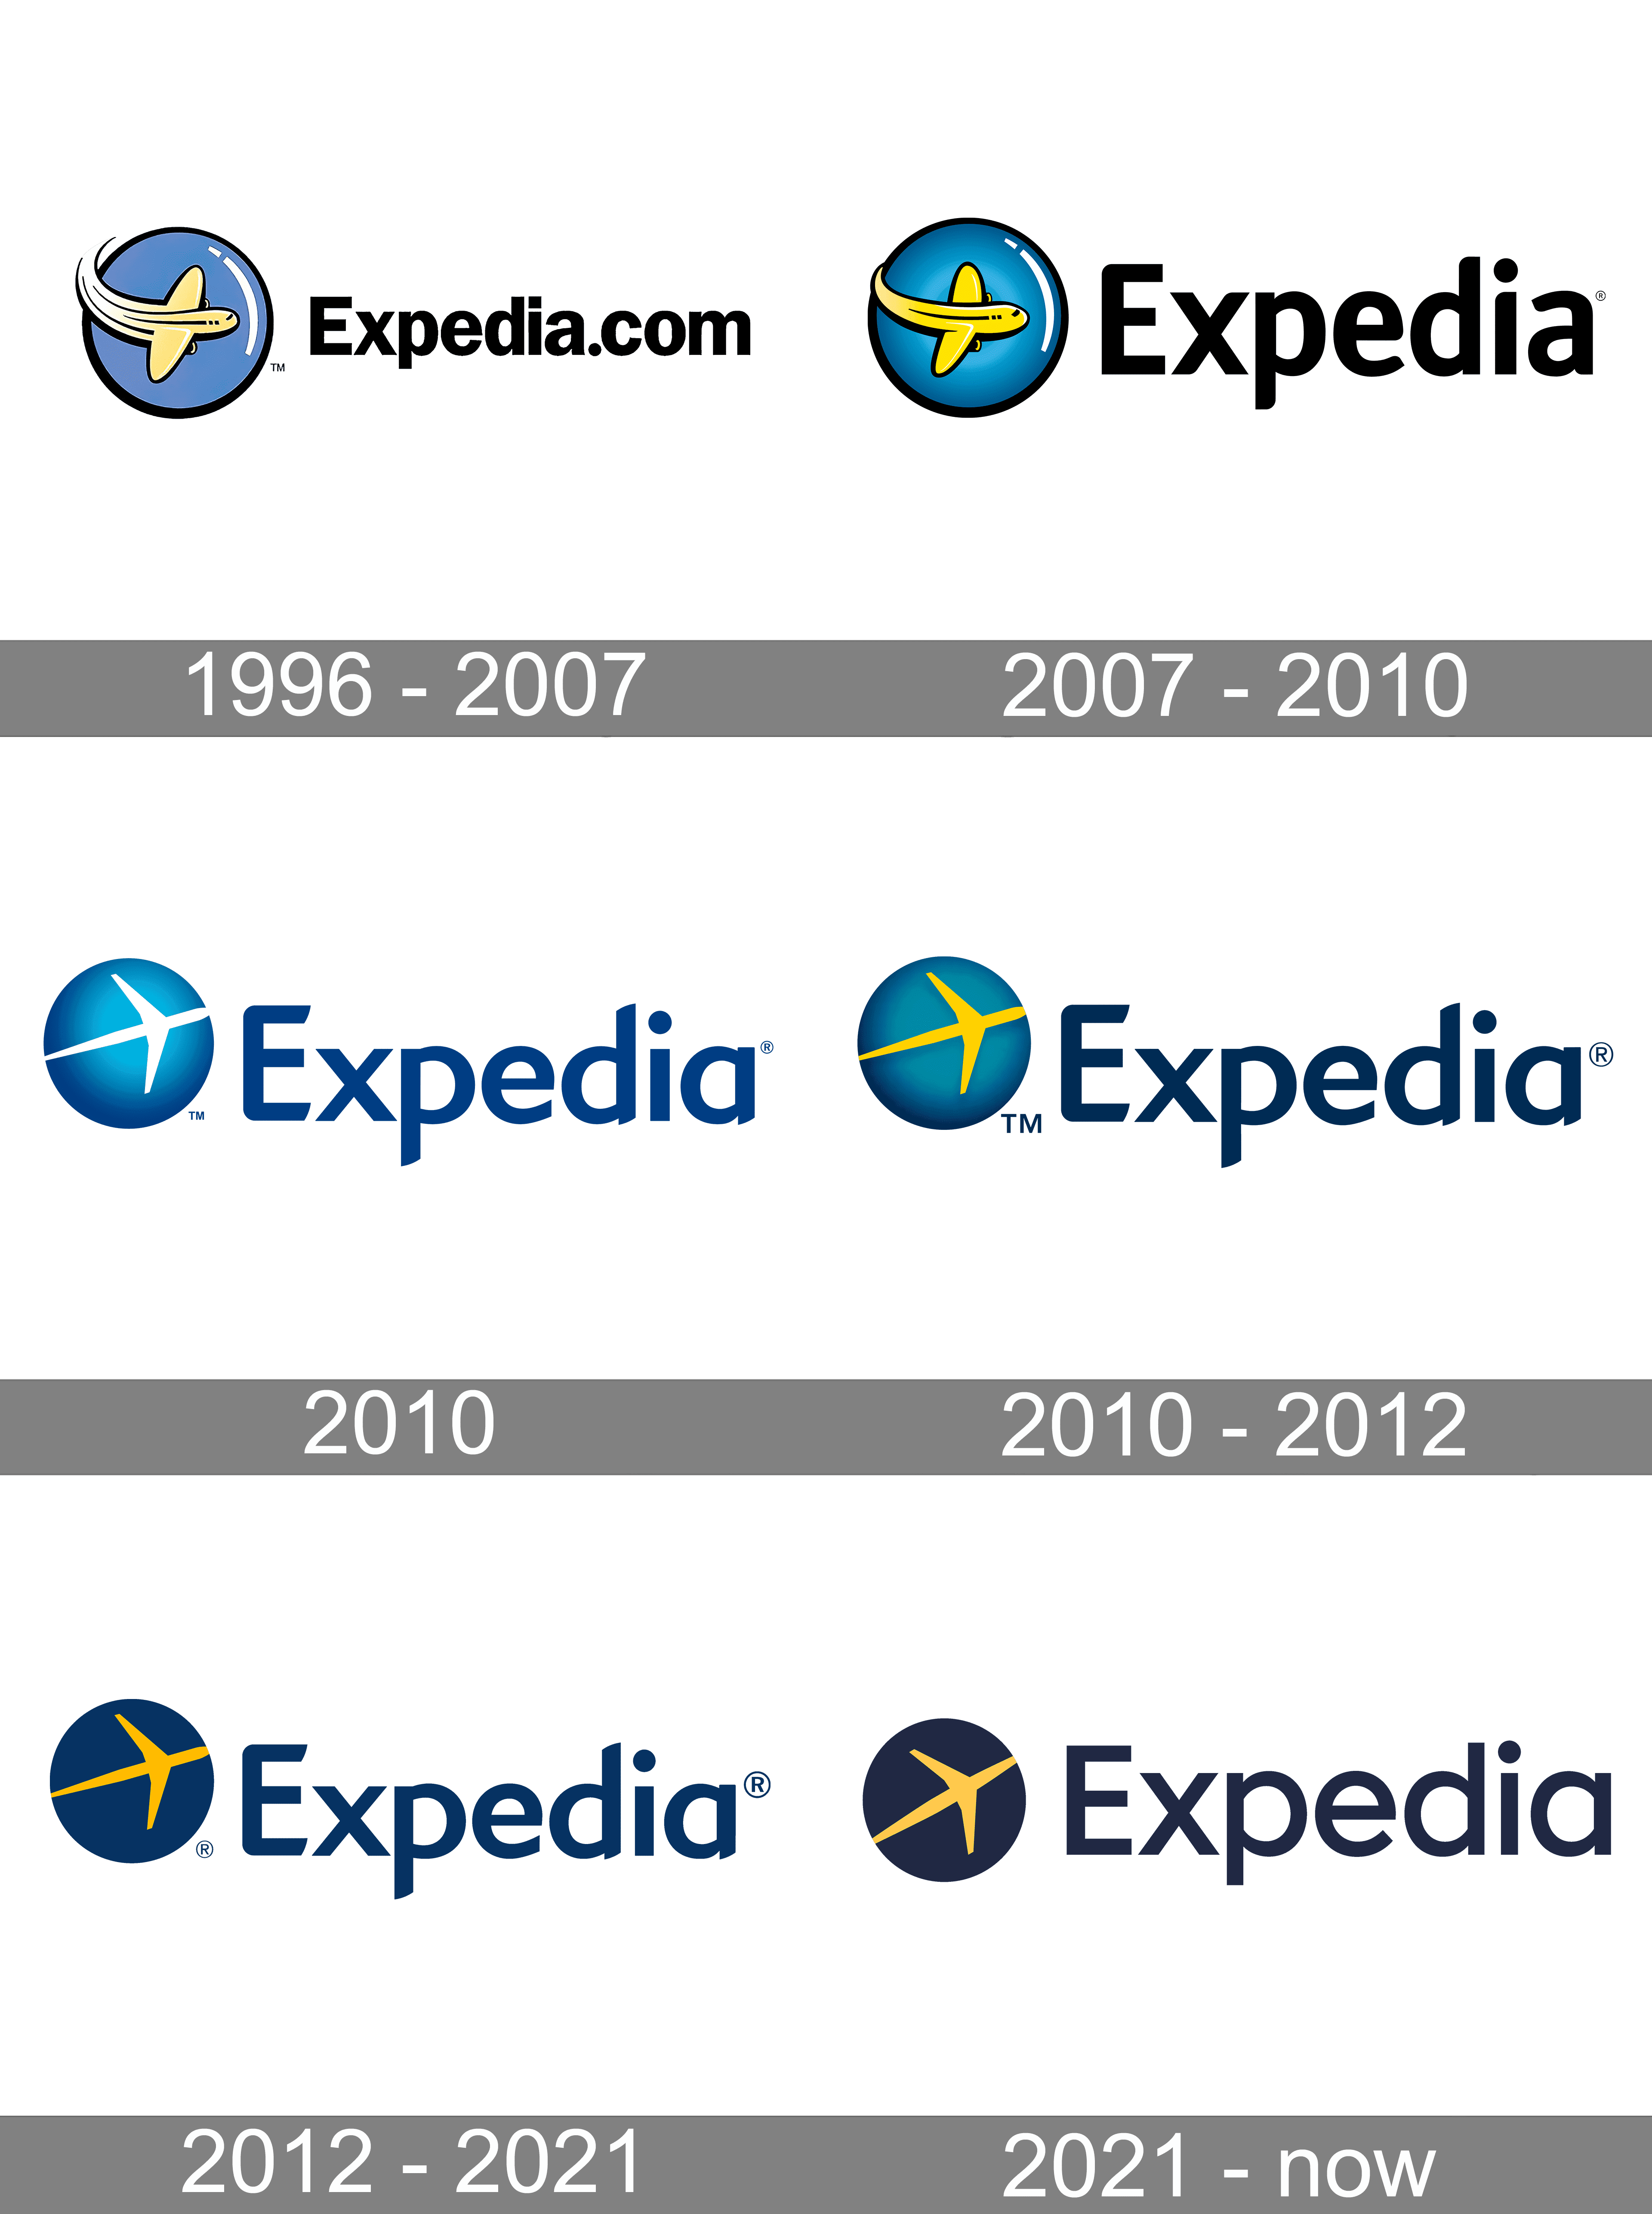 what travel brands does expedia own